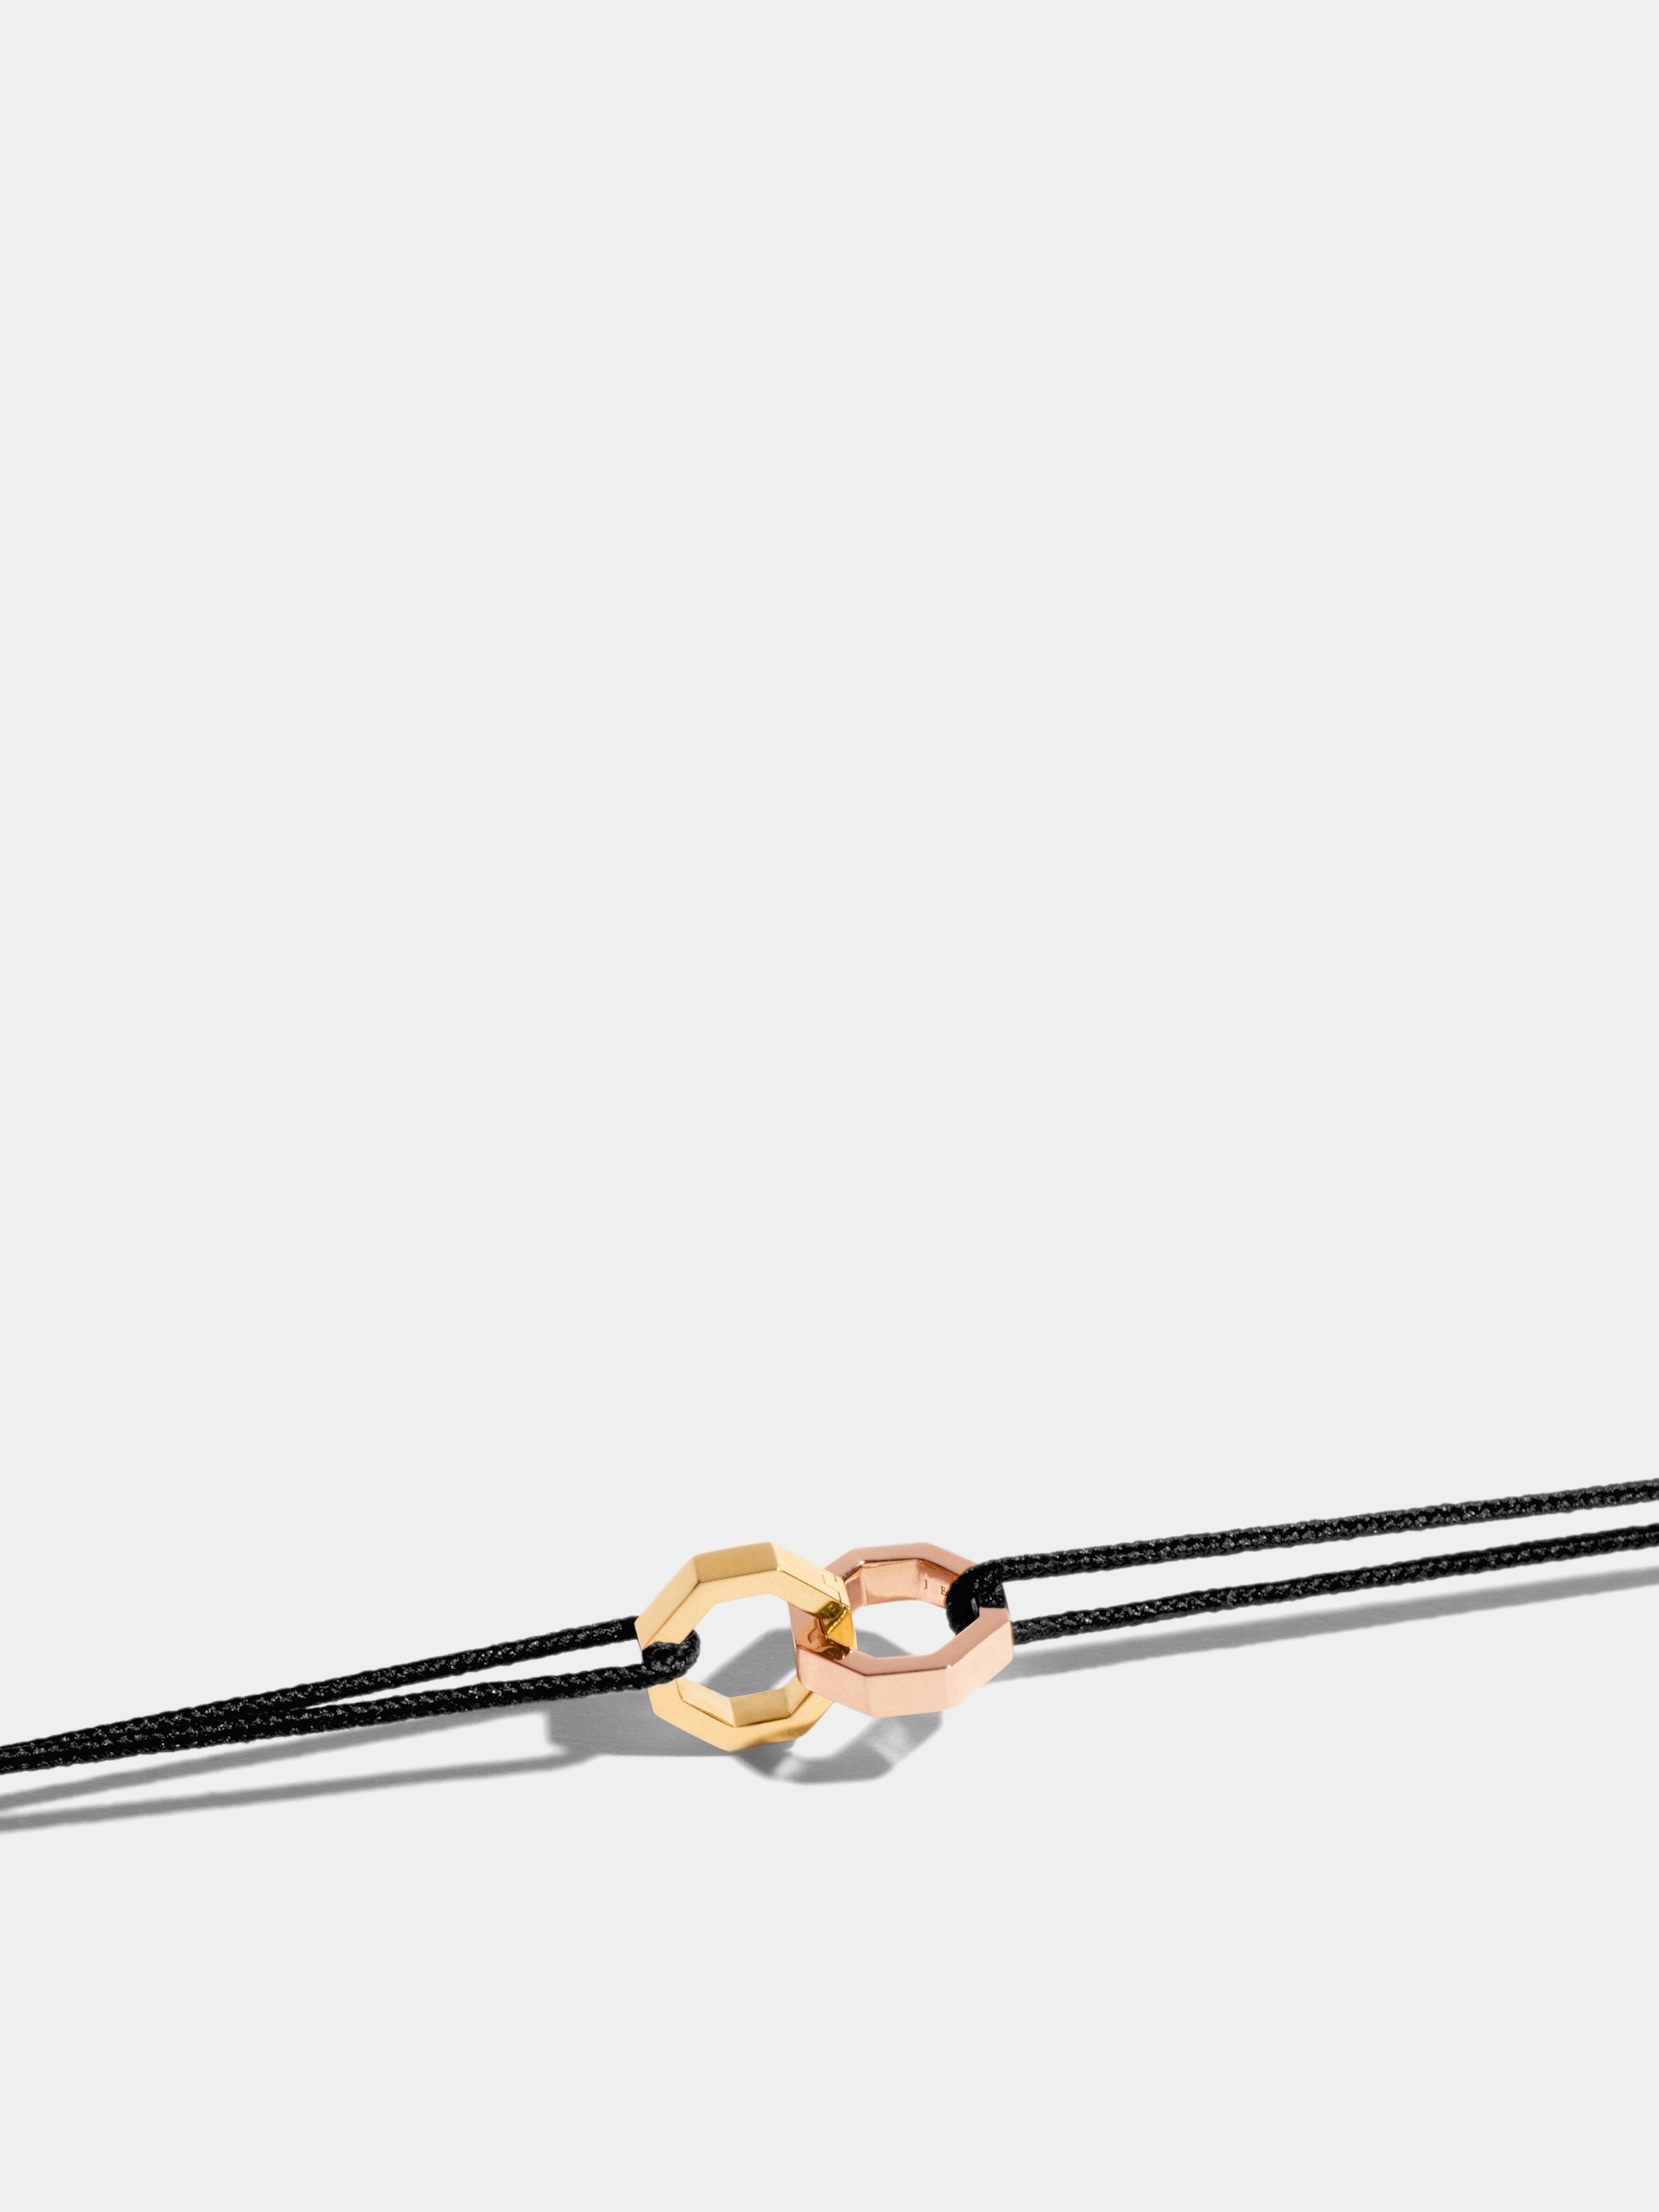 Octogone motif in 18k Fairmined ethical yellow et pink gold, on a cord.